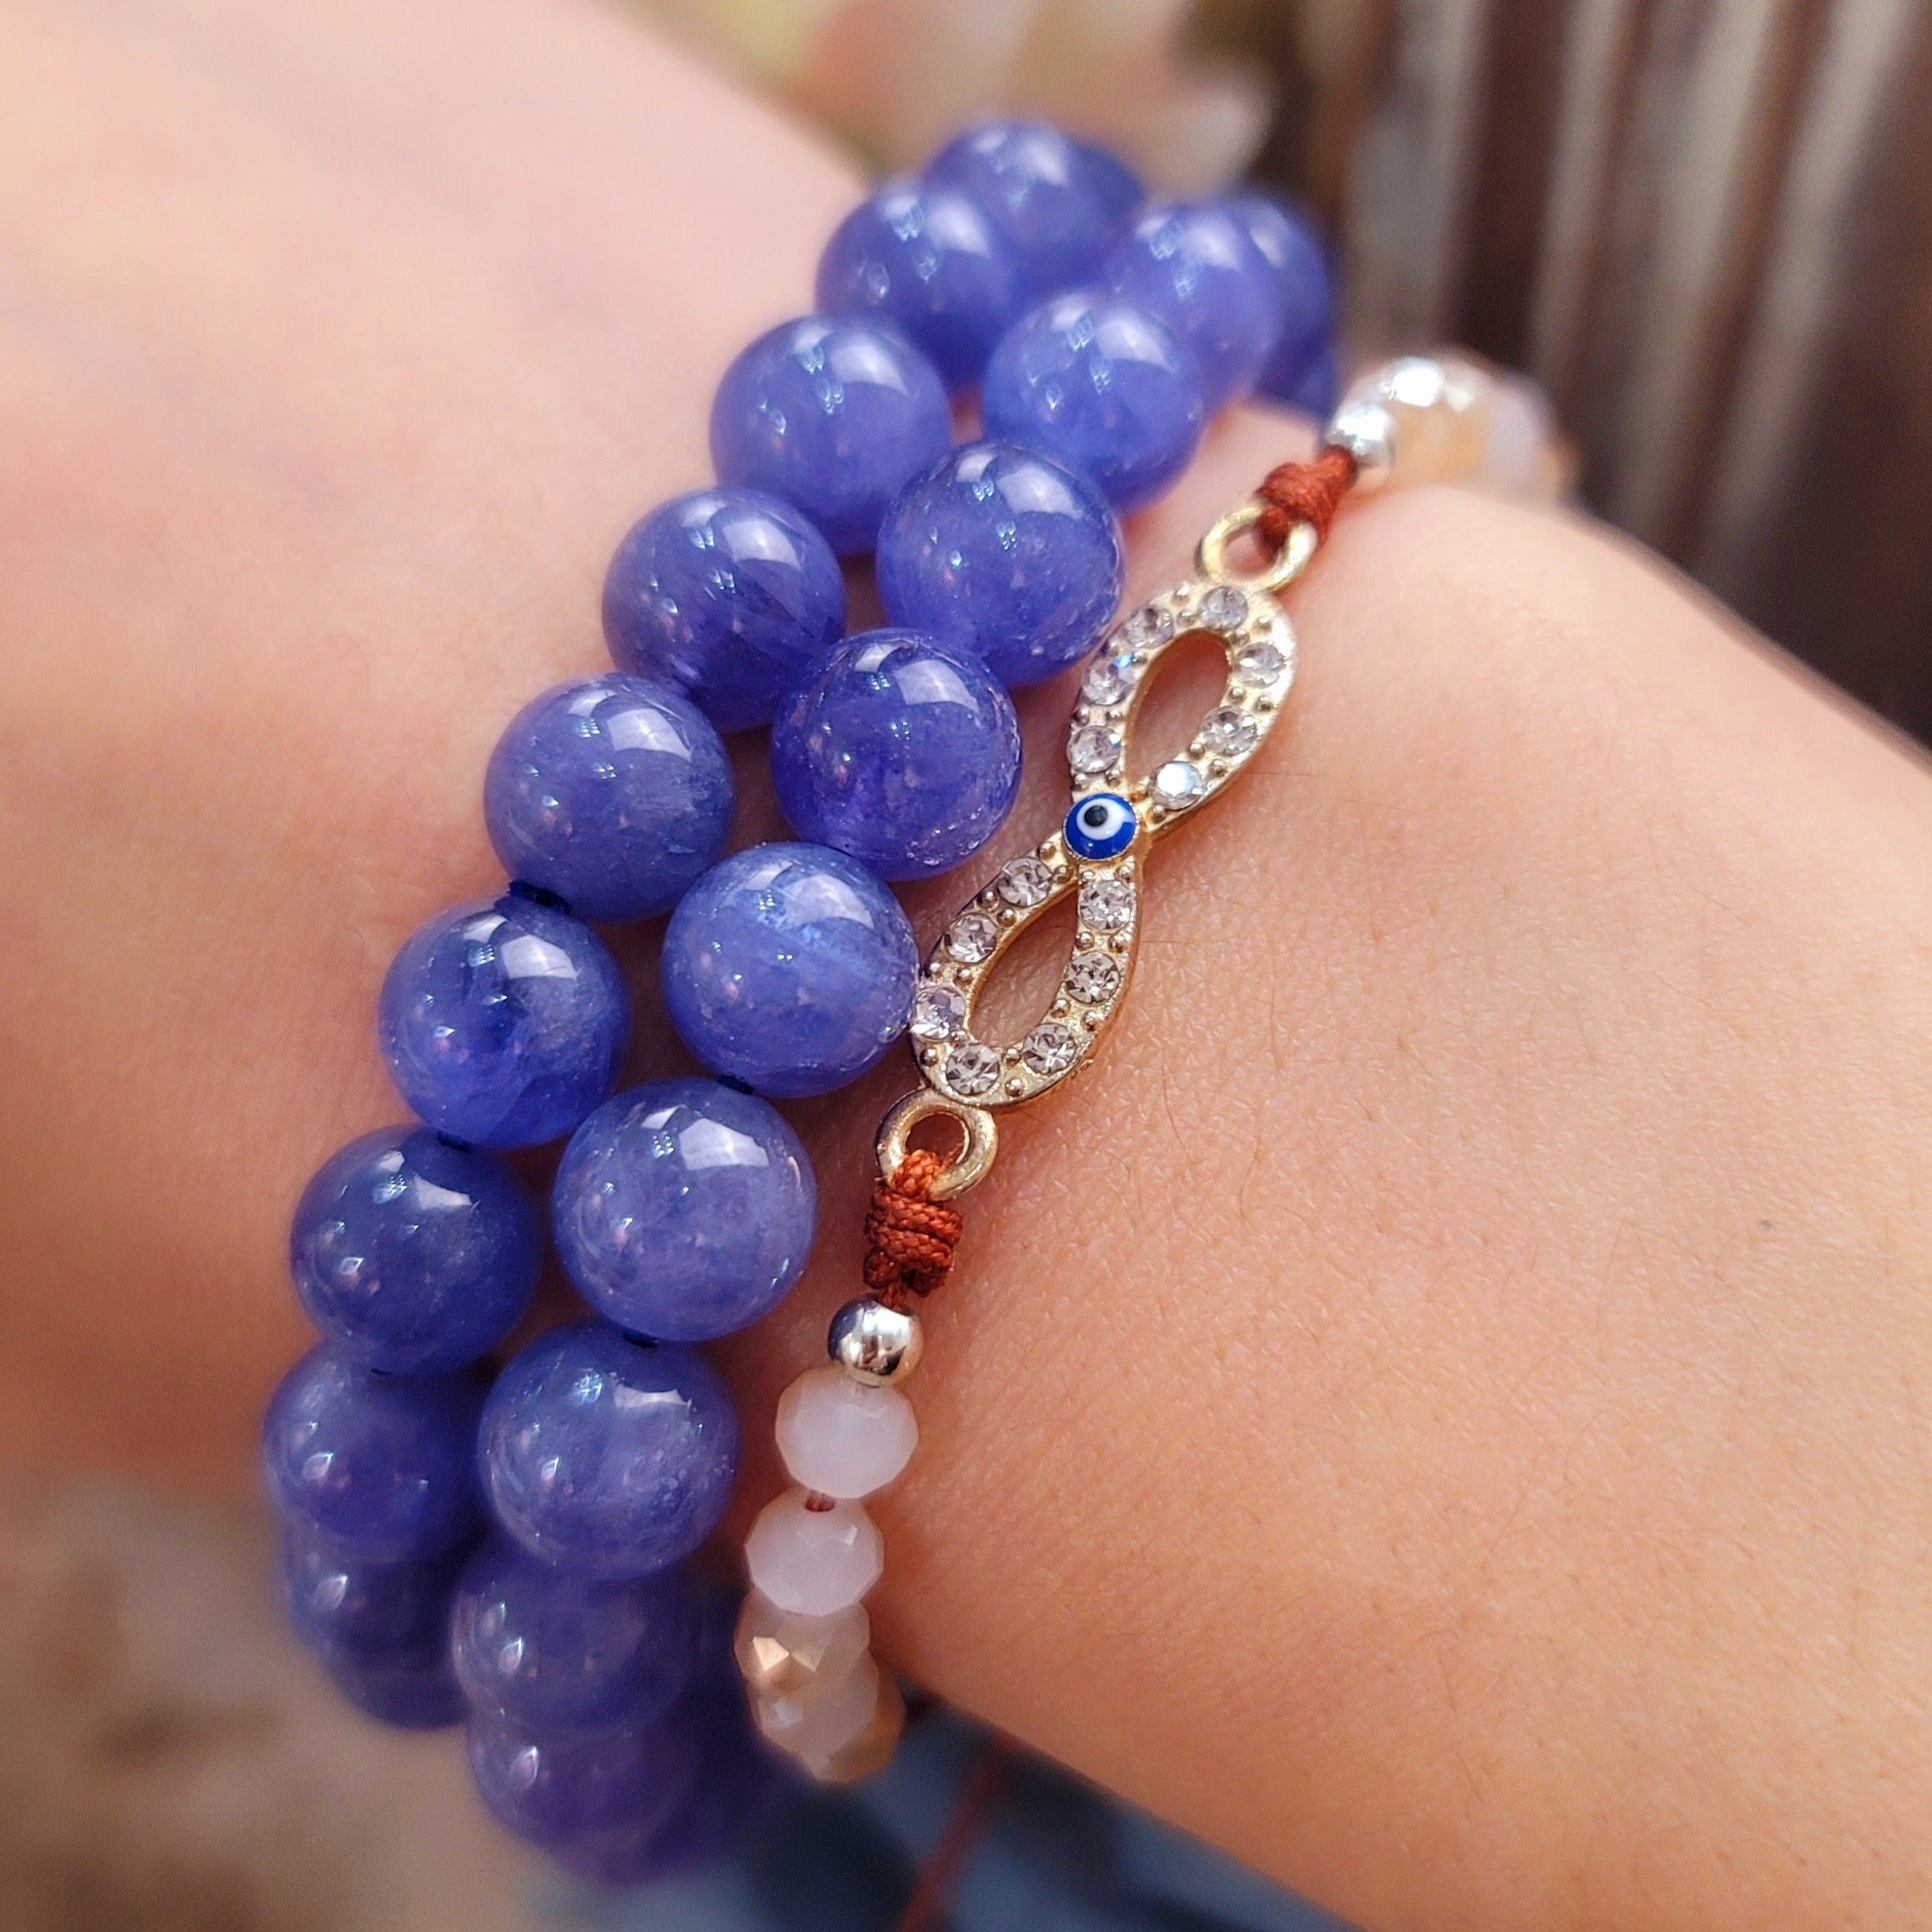 Tanzanite Bracelet (AAA Grade) for Compassion, Intuition & Raising your Vibration